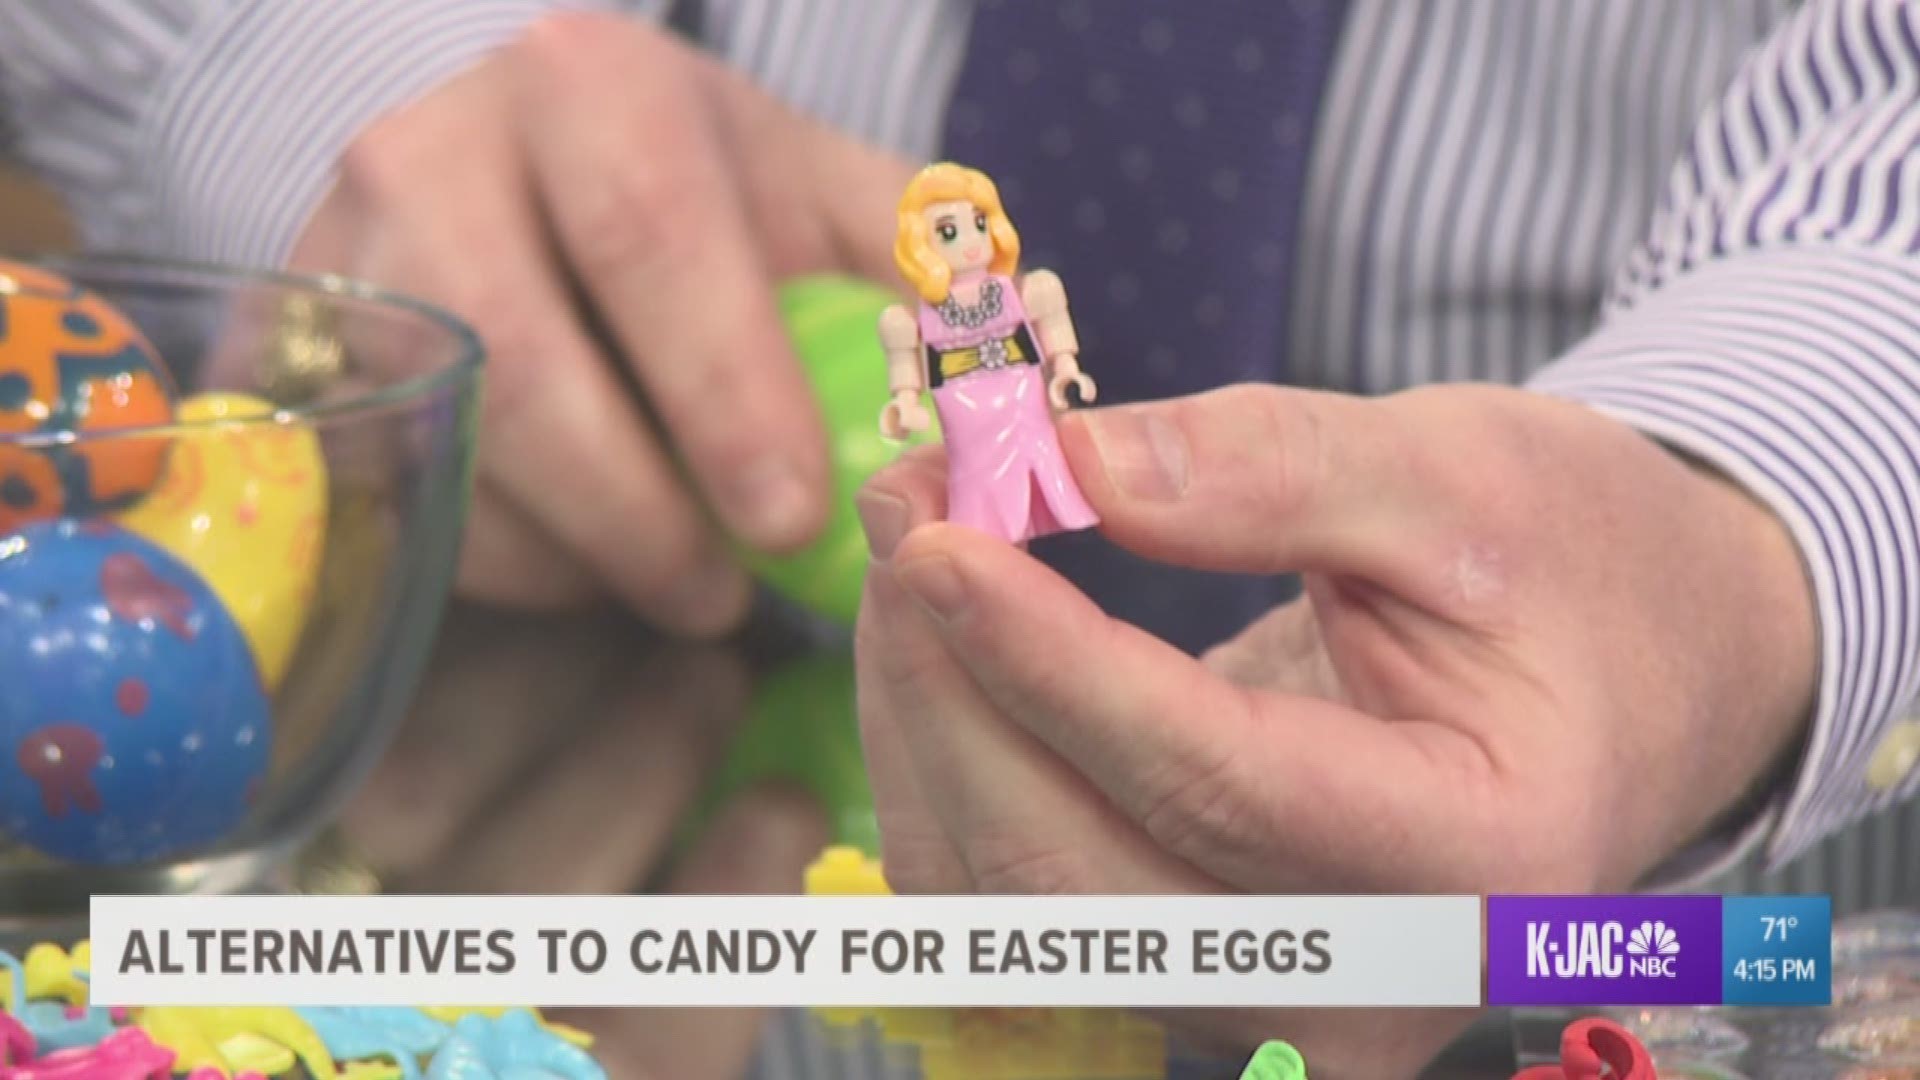 If you're looking to put something other than candy in your kid's Easter Eggs this year, then we've got some options for you.